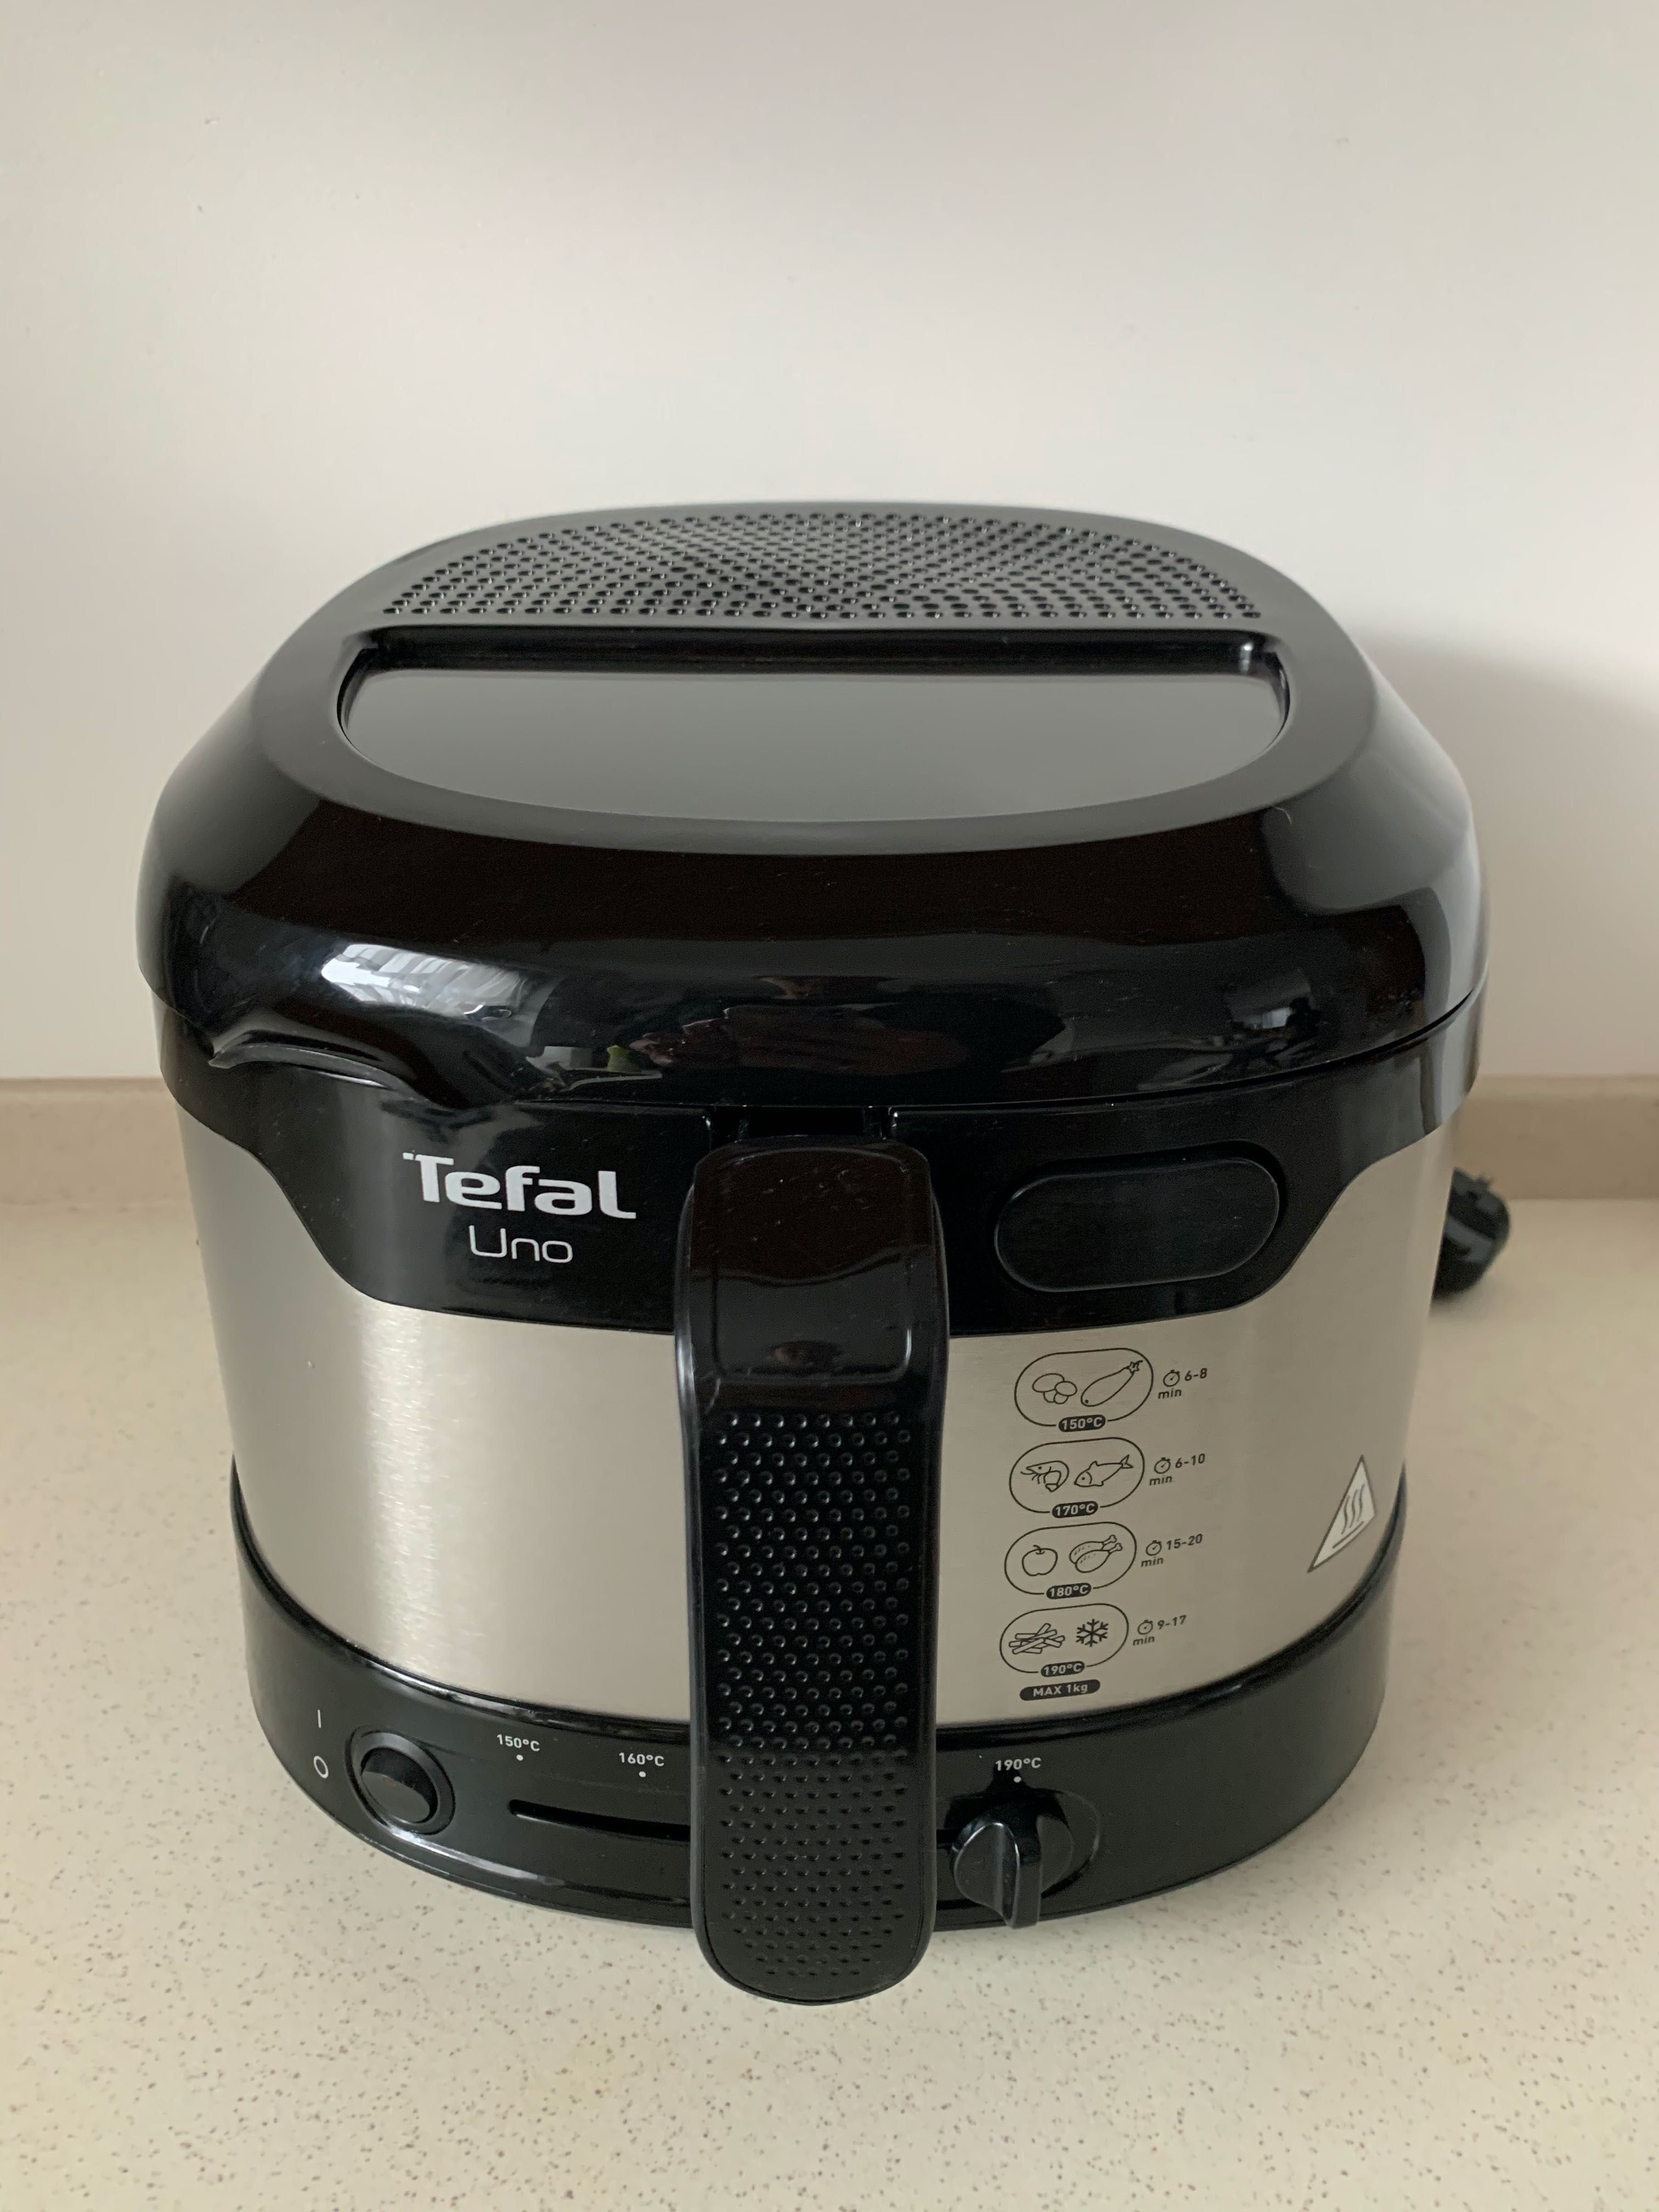 Frytownica Tefal Uno